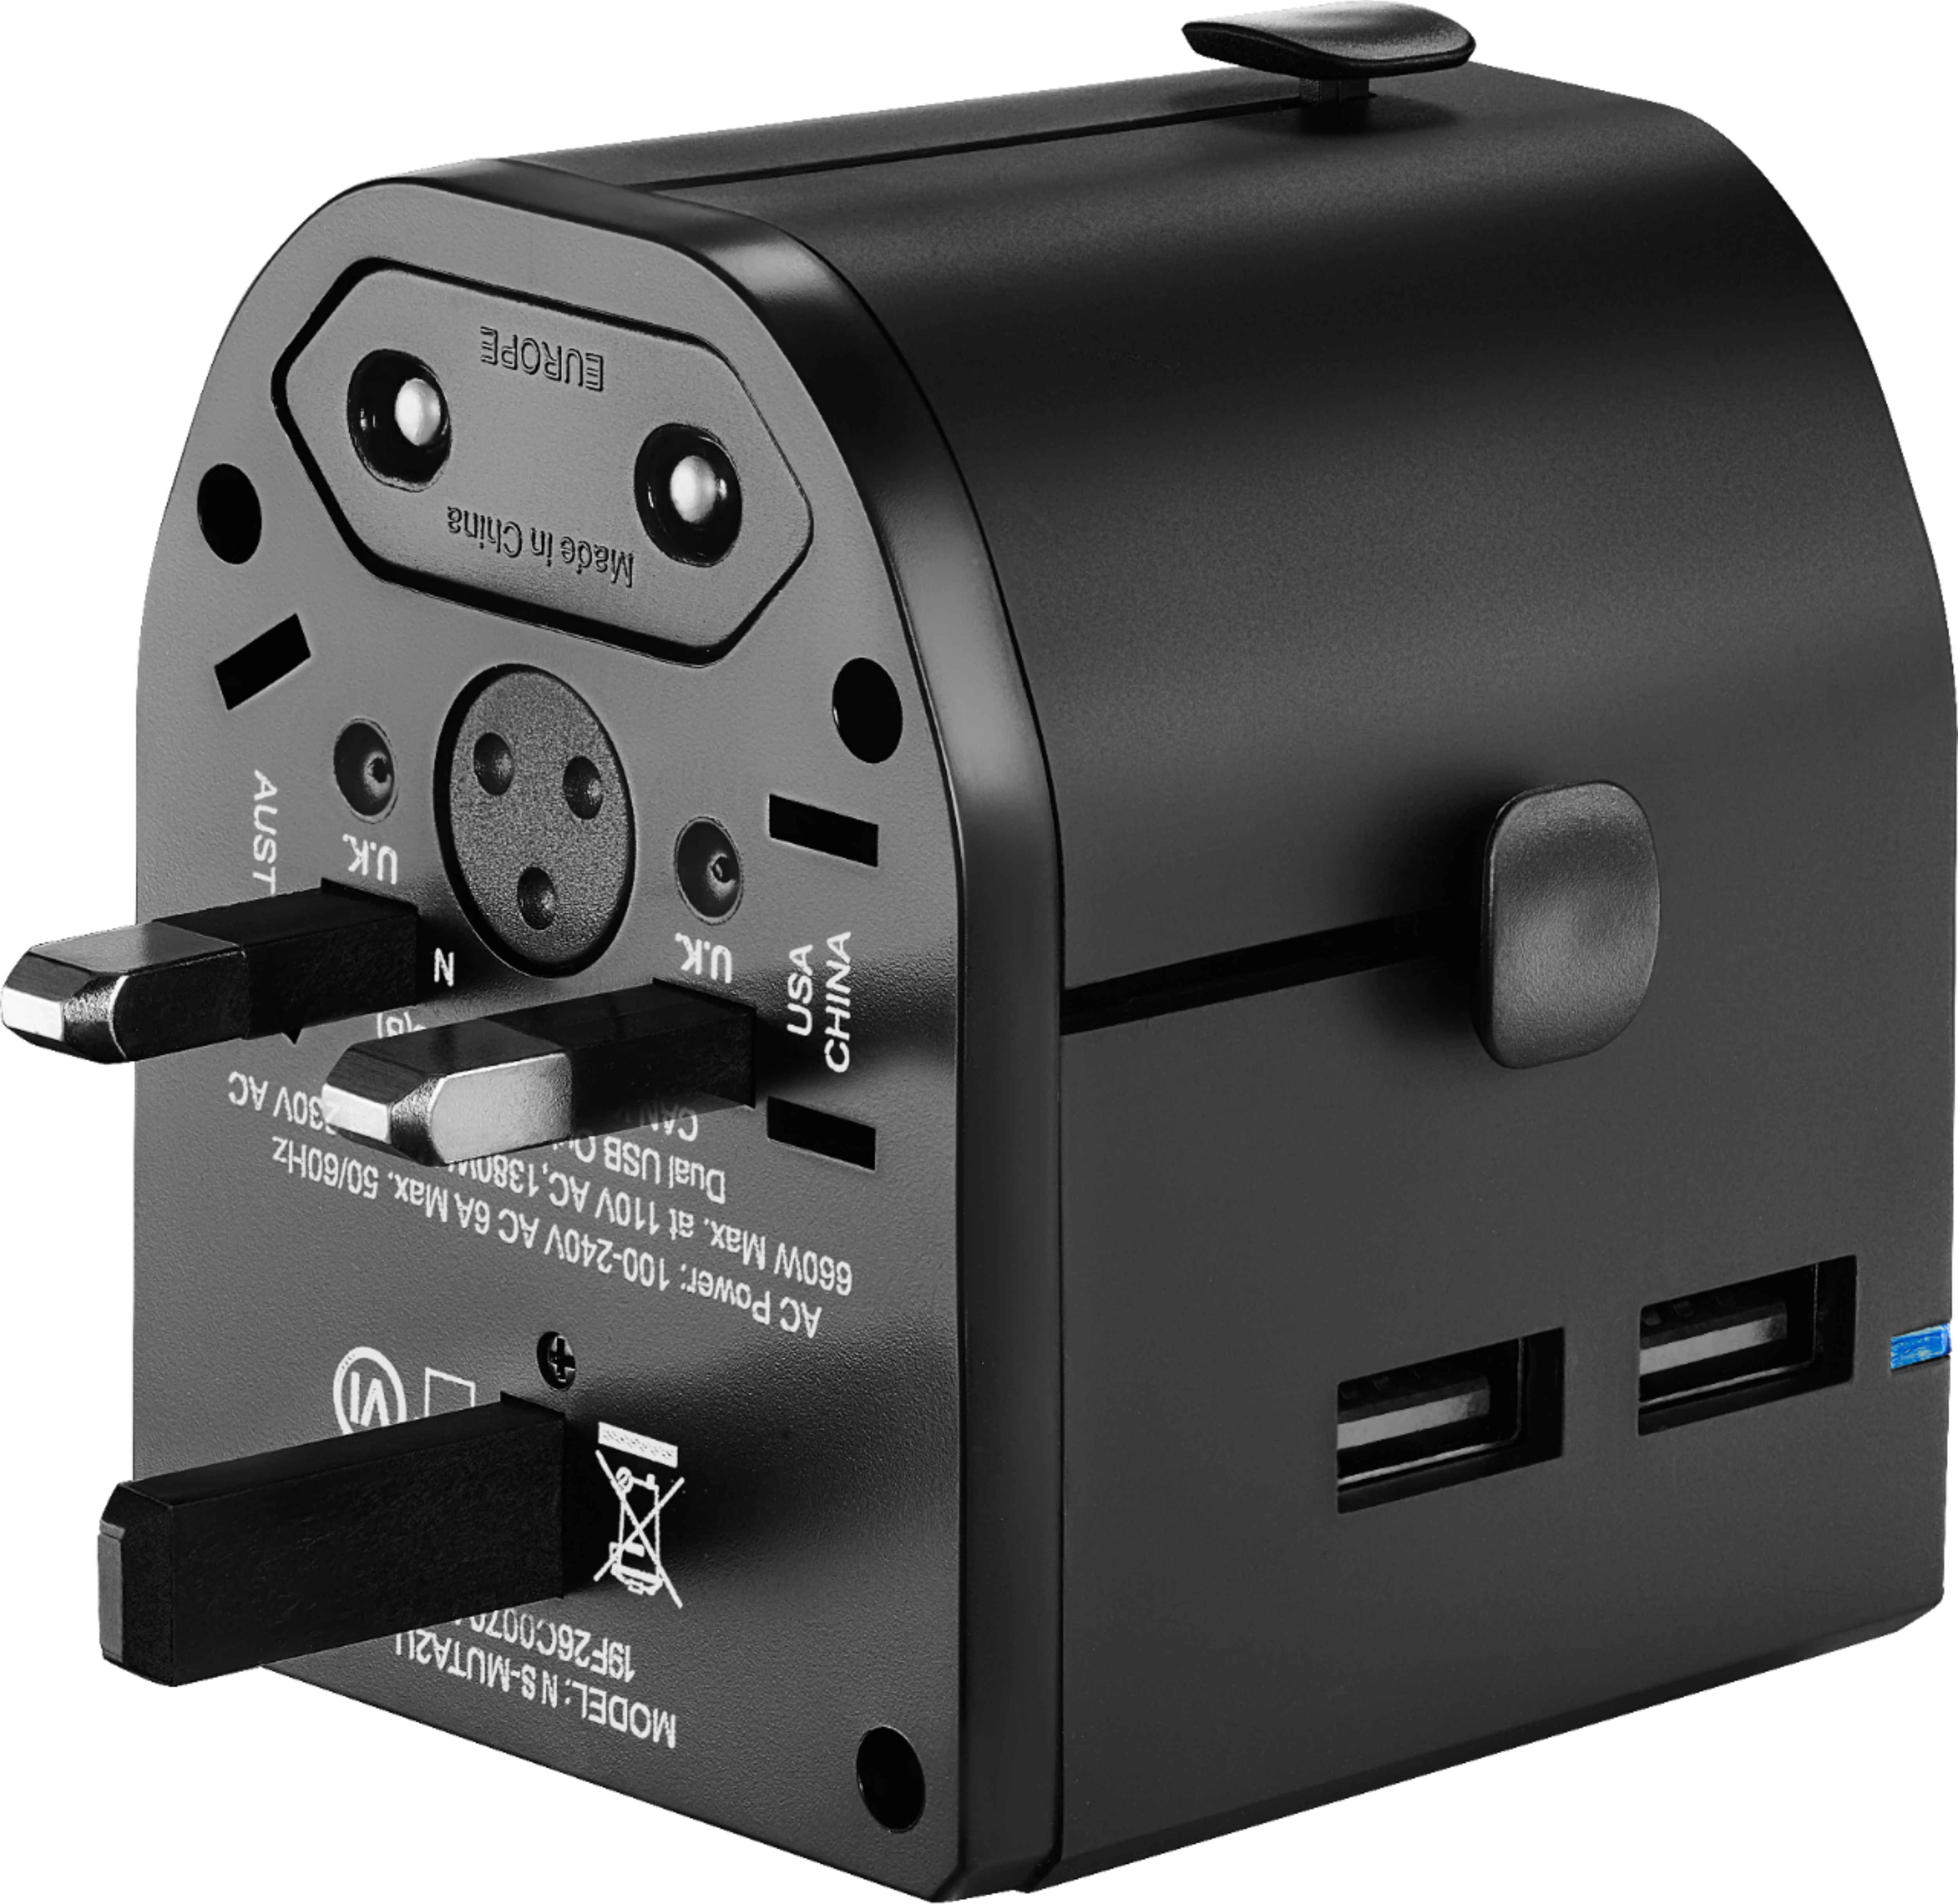 Sarvatr Universal Travel Adapter, Adapter, Travel Adapter, Universal Adapter,  Adapter Charger, International Adapter All in one - Sarvatr Store